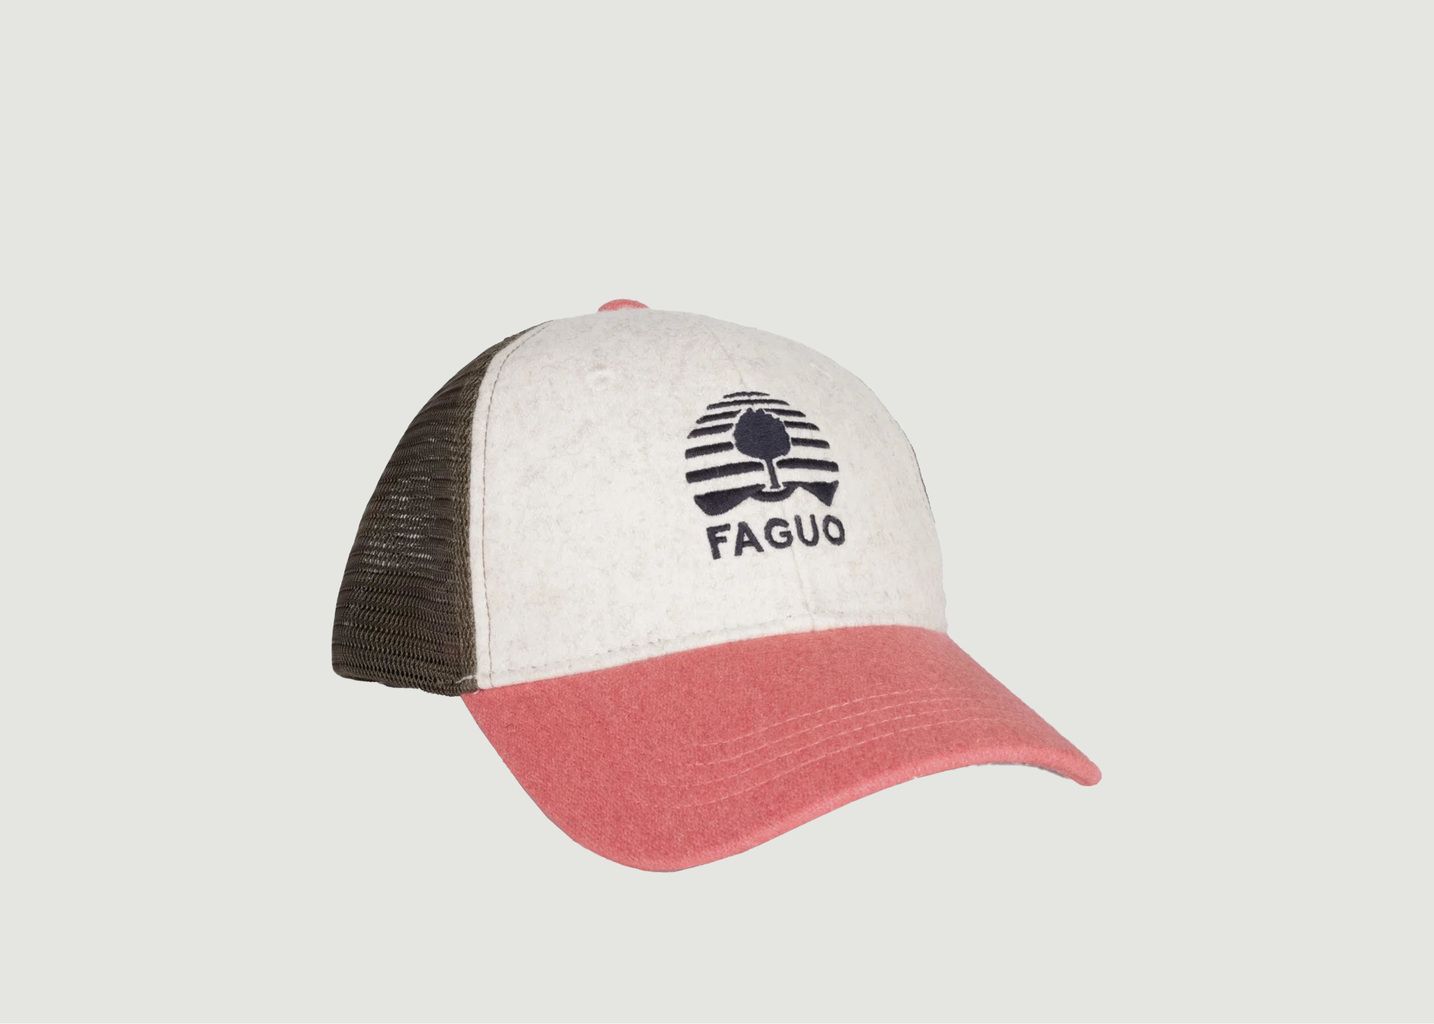 Faguo Embroidered Cap